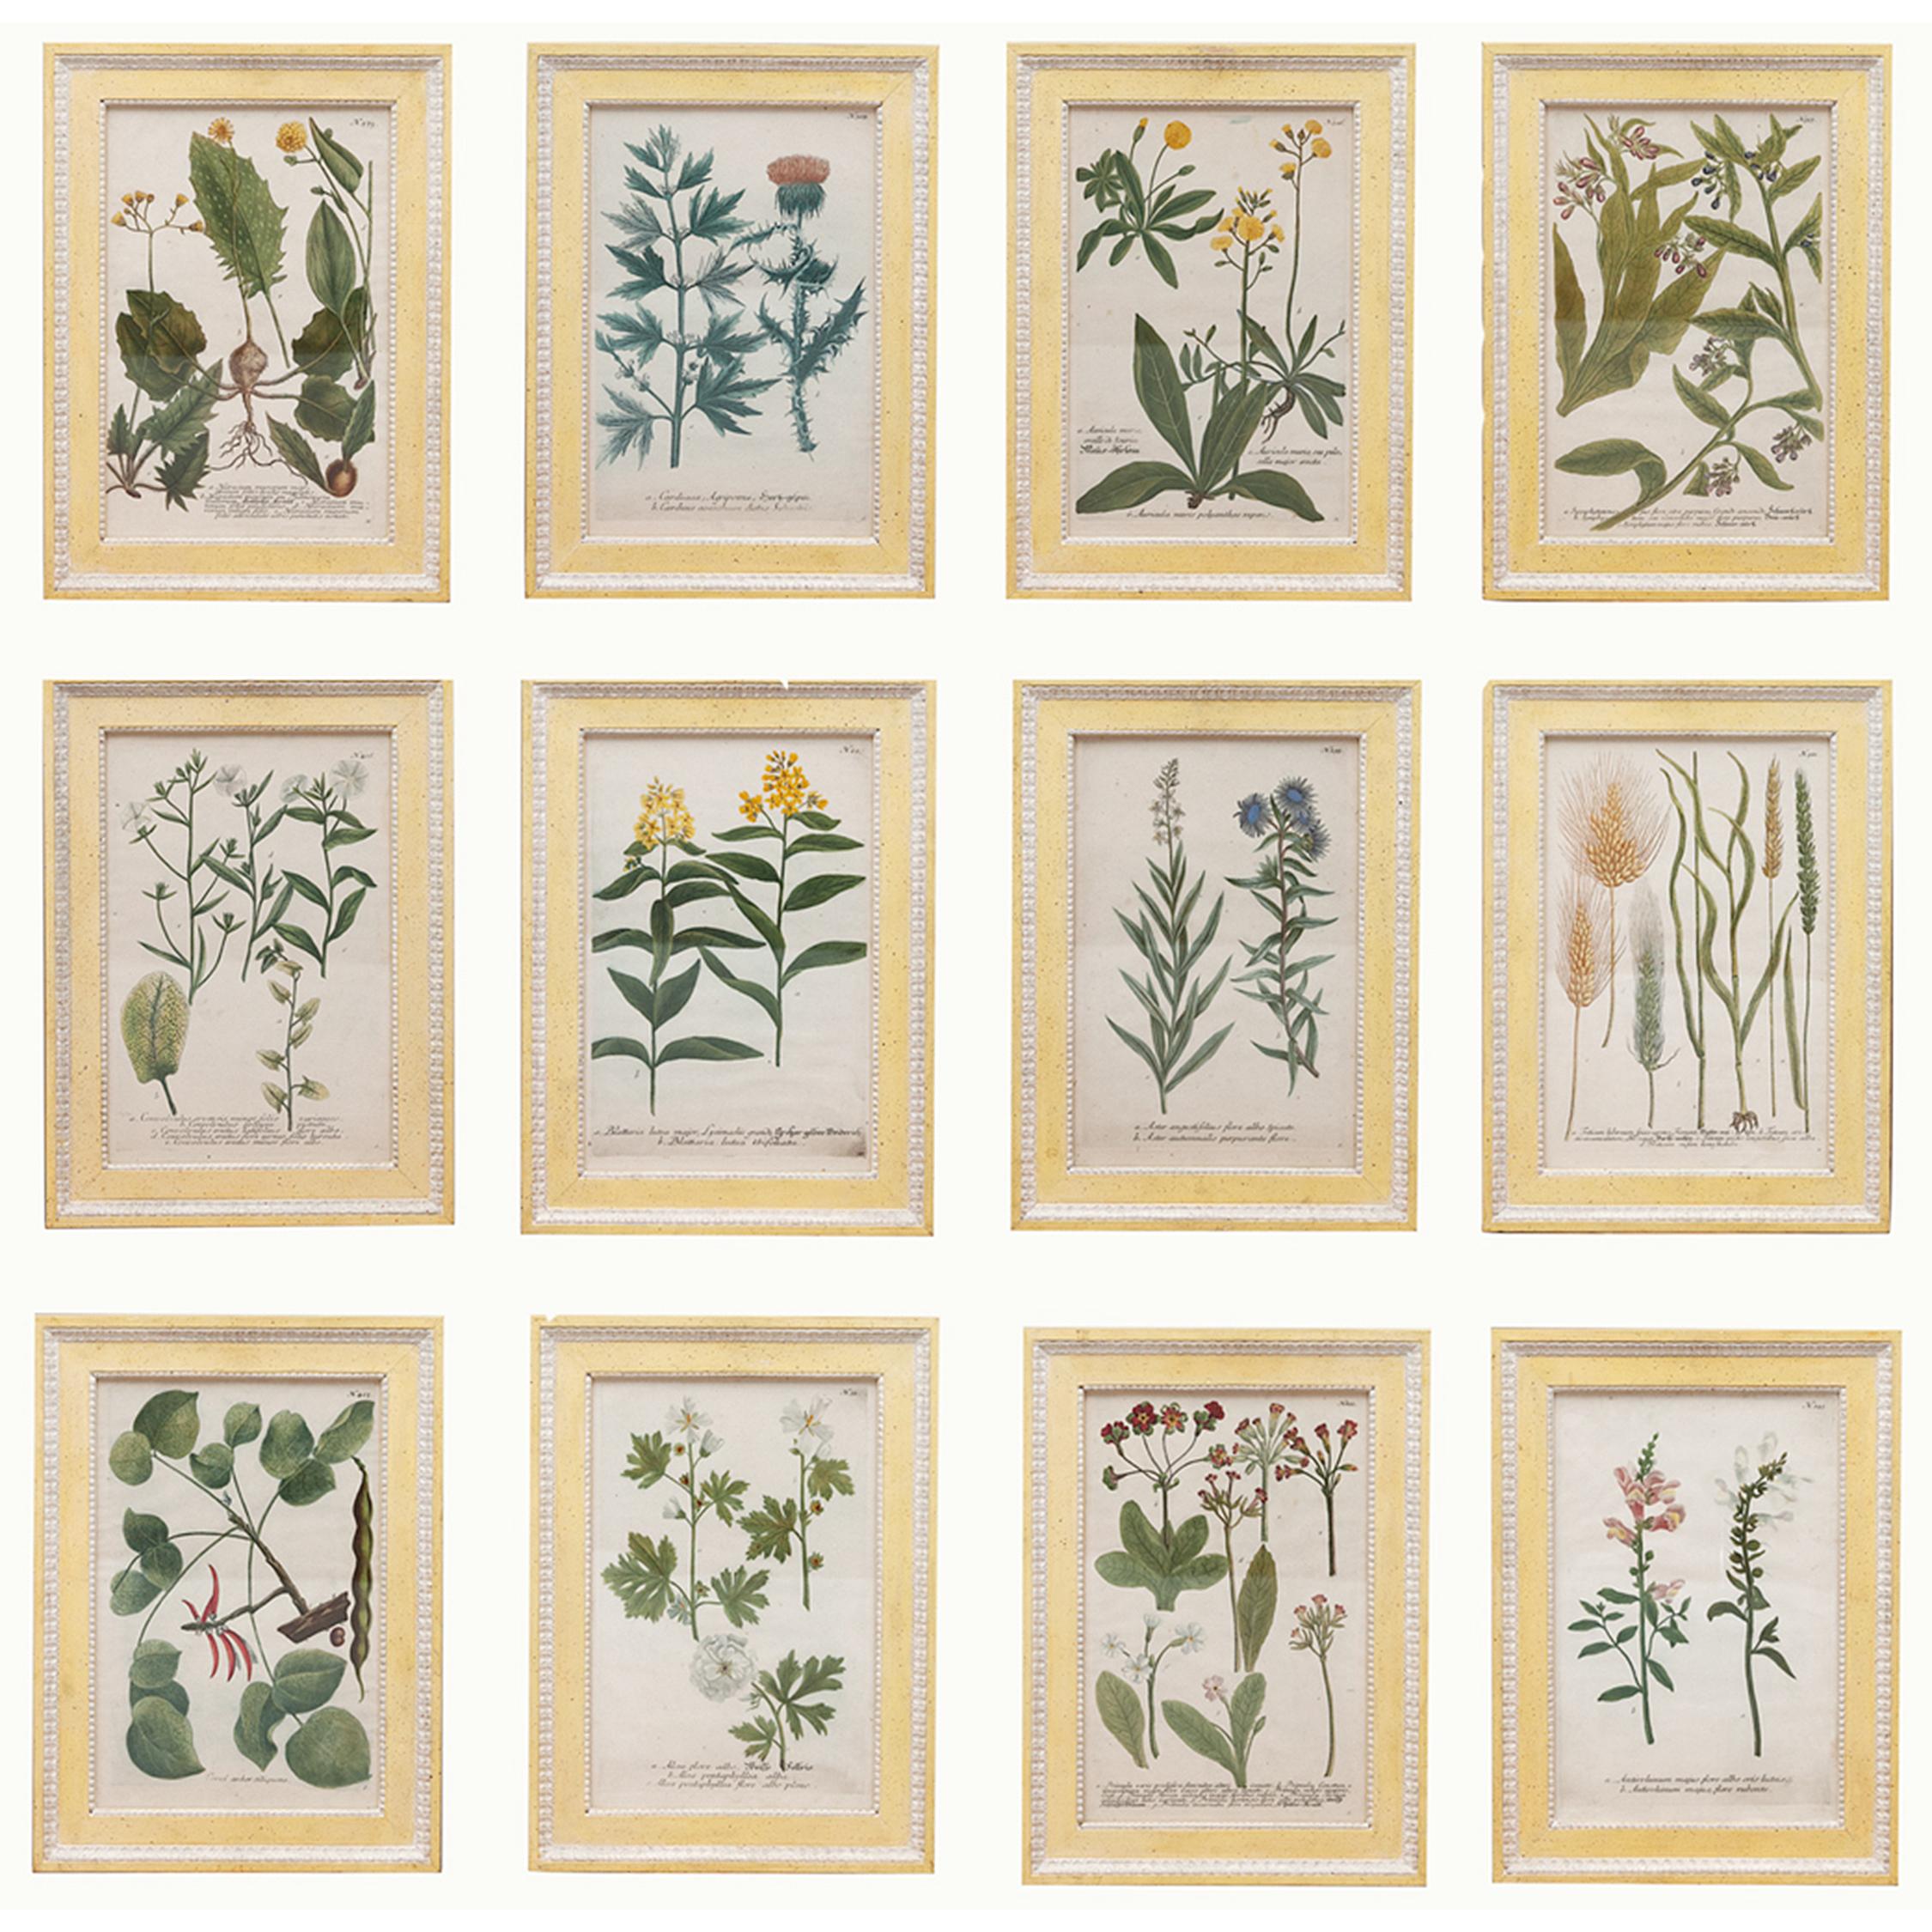 Set of 12 18th century botanical prints by Georg Dionysius Ehret. From 